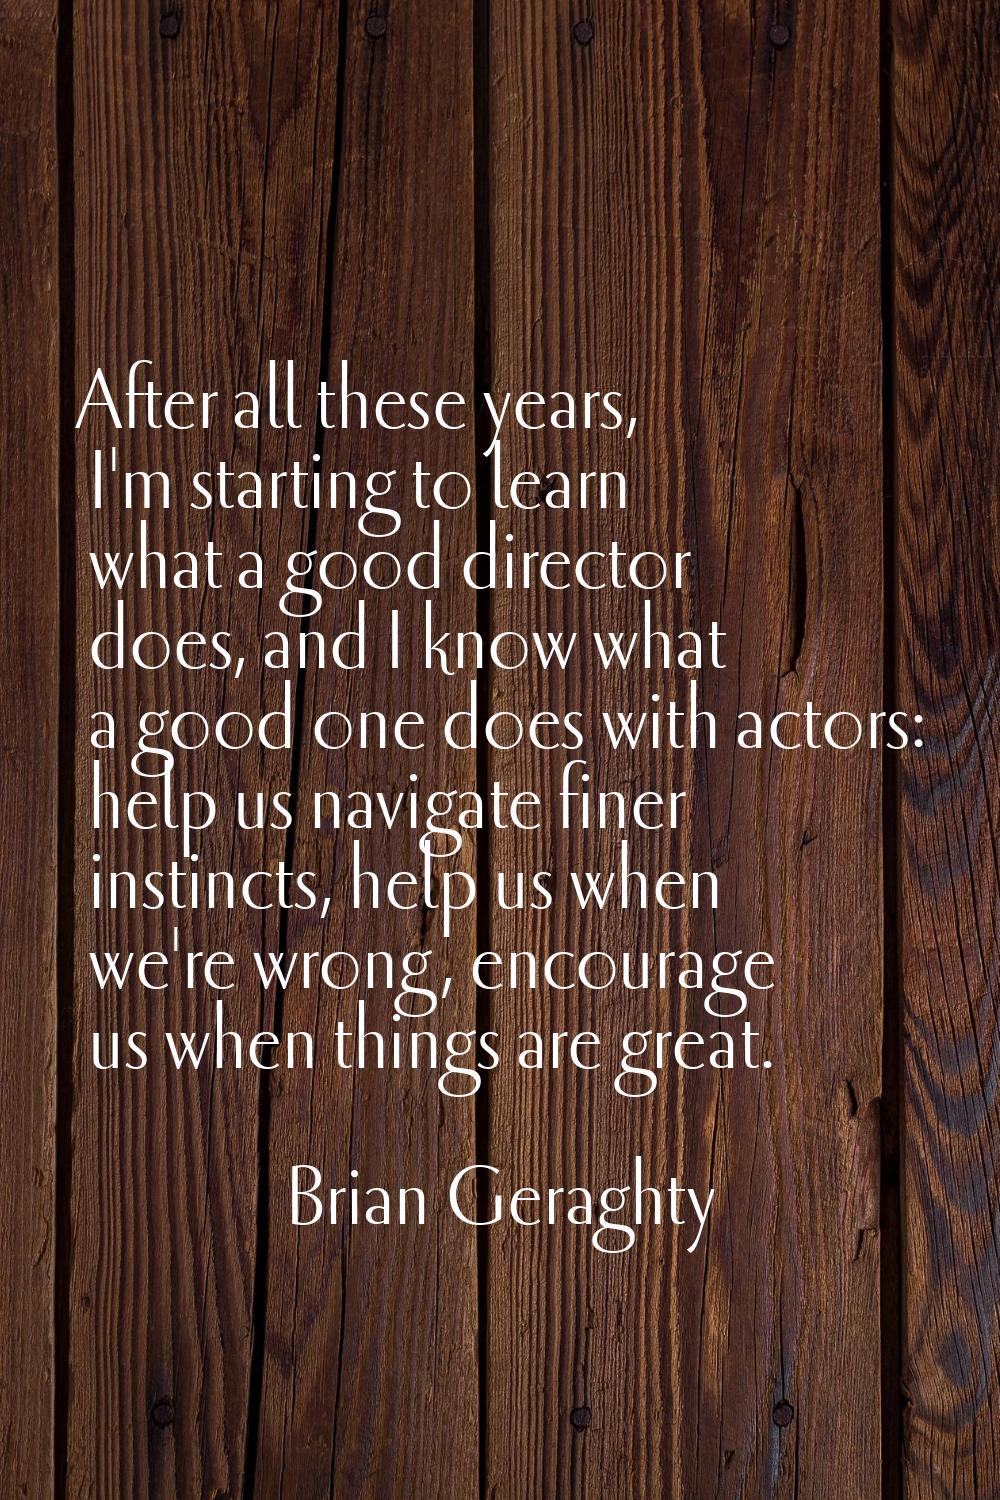 After all these years, I'm starting to learn what a good director does, and I know what a good one 